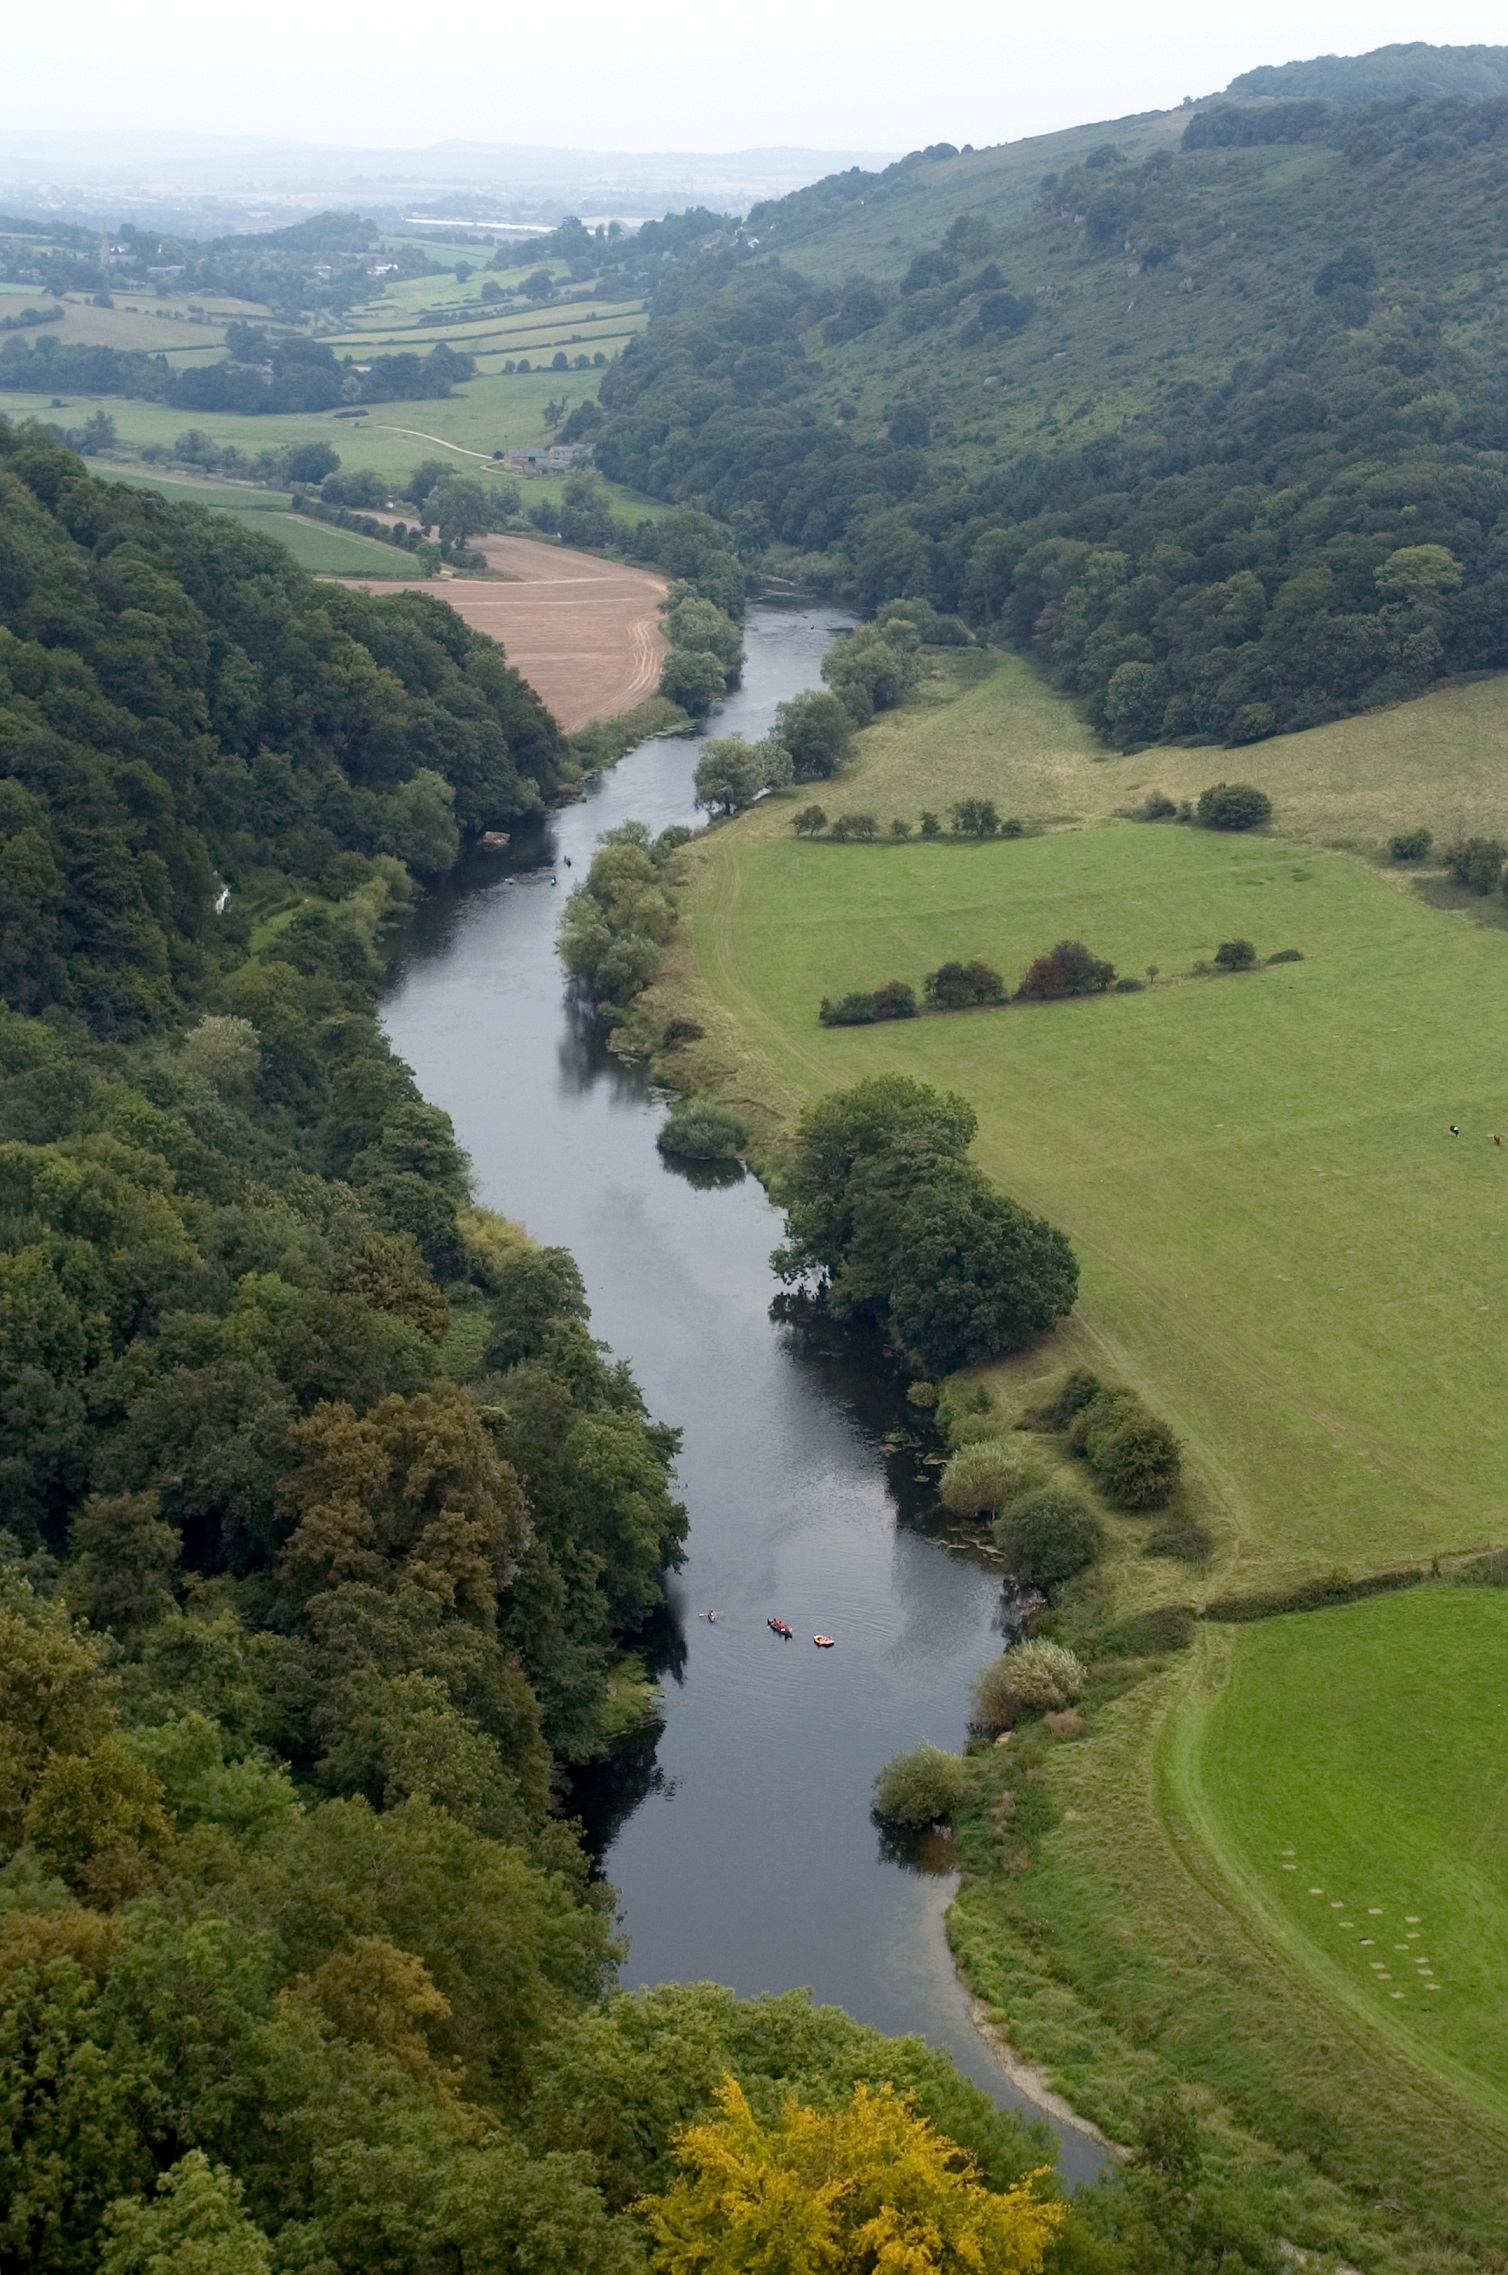 The River Wye curving through Symonds Yat in the Wye Valley which is designated for conservation due to its significant landscape value as an area of outstanding natural beauty